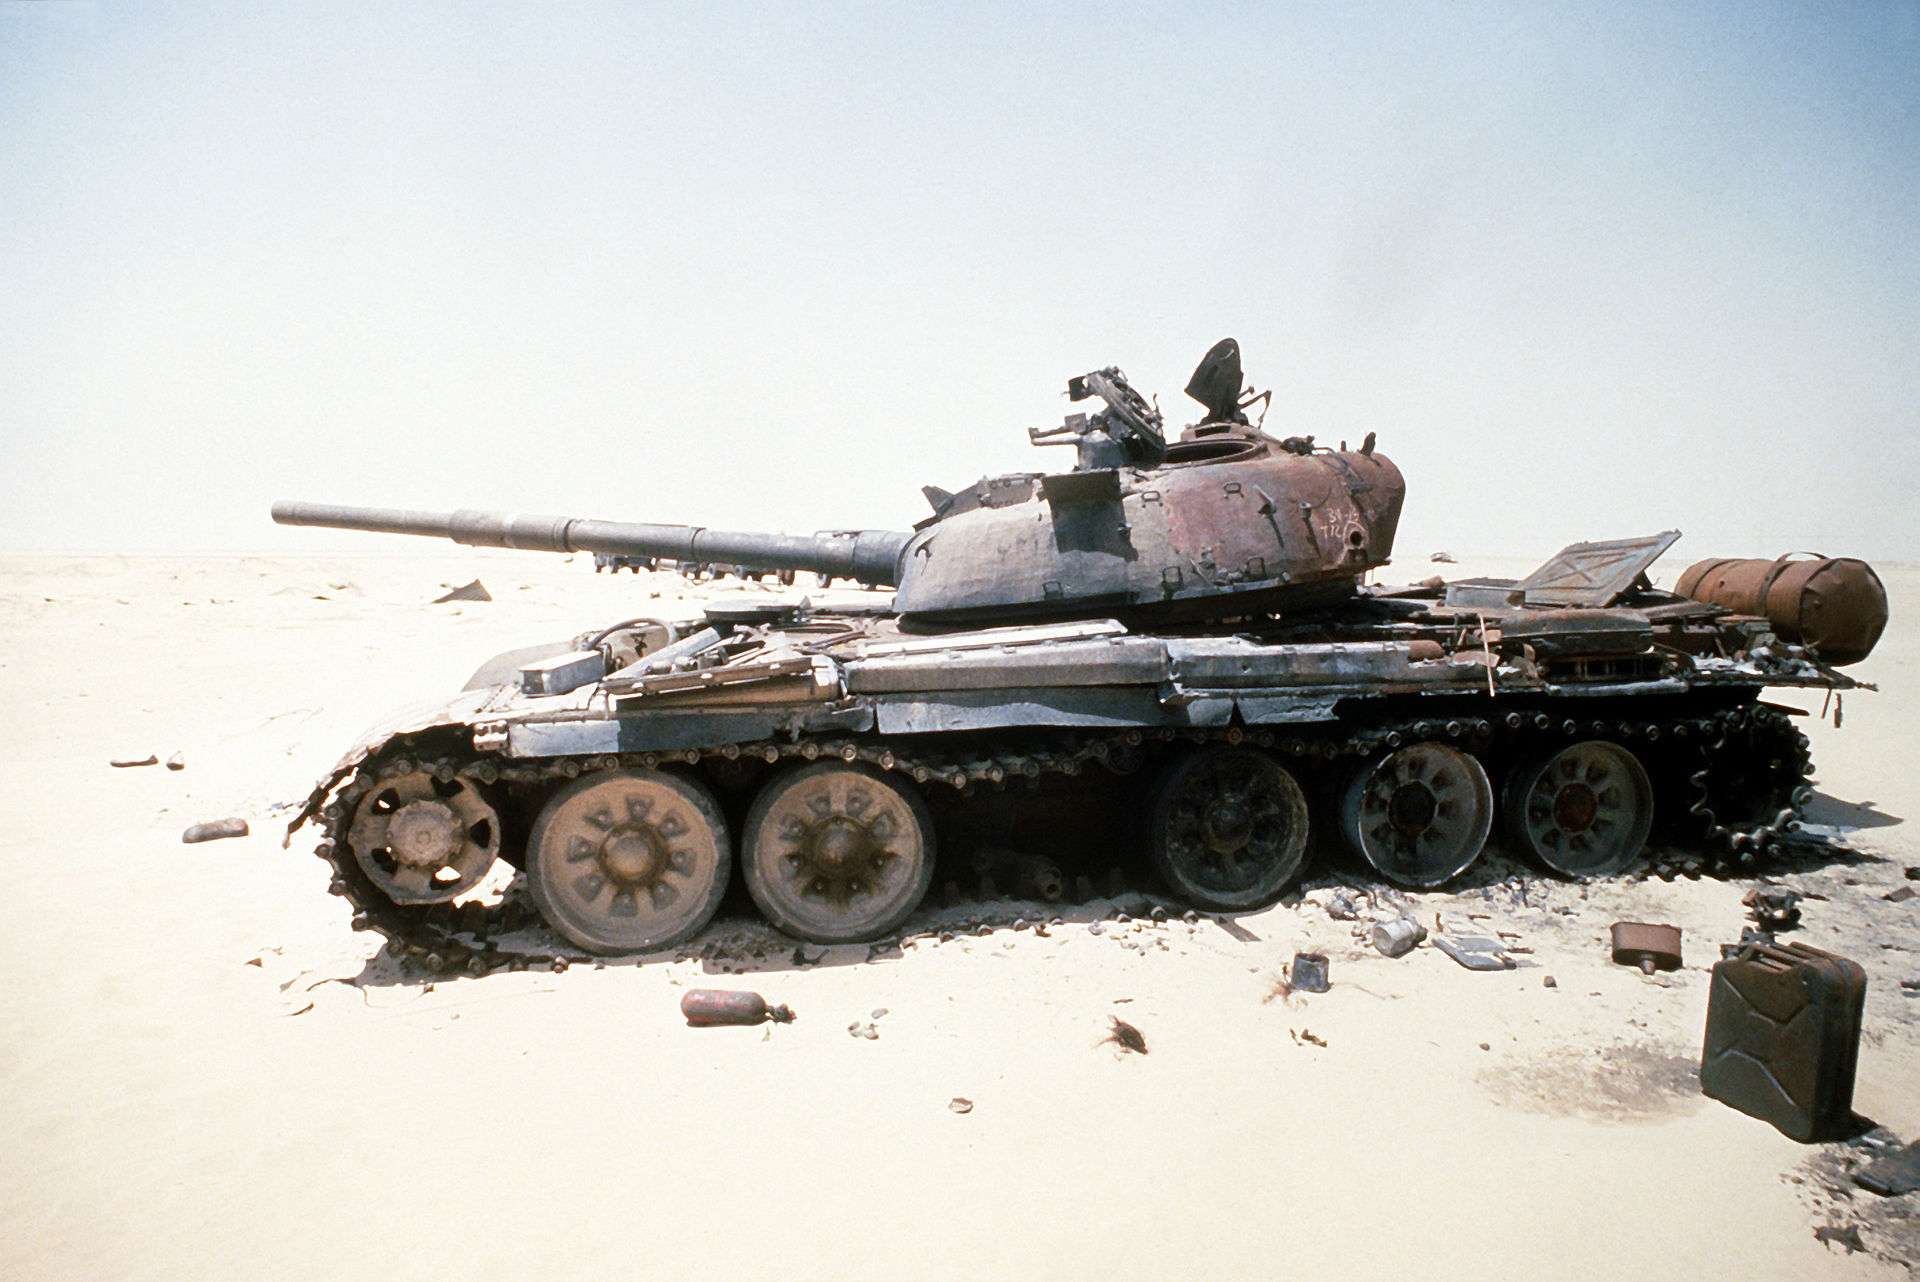 Iraqi T-72 destroyed during the Gulf War.